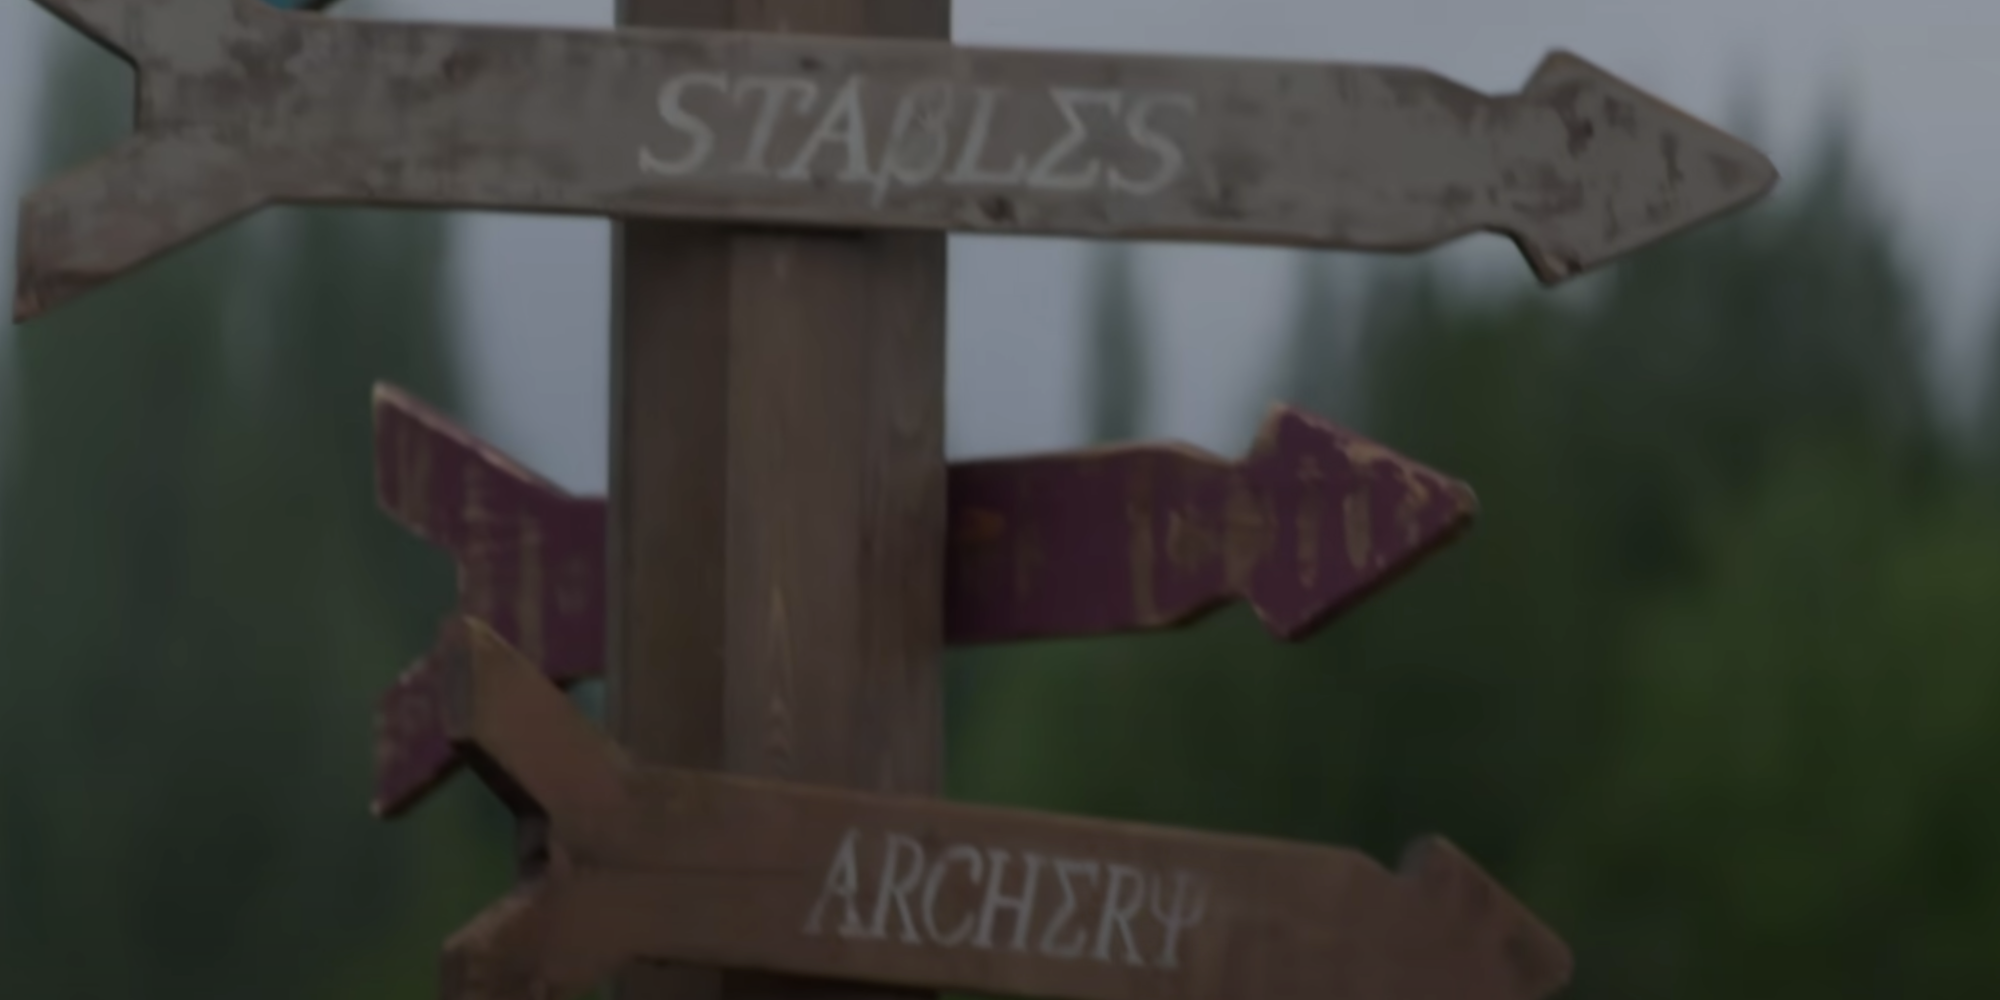 Direction signs for Camp Half-Blood that point to "Stables" and "Archery" with Greek letters interspersed with English ones in Percy Jackson and the Olympians